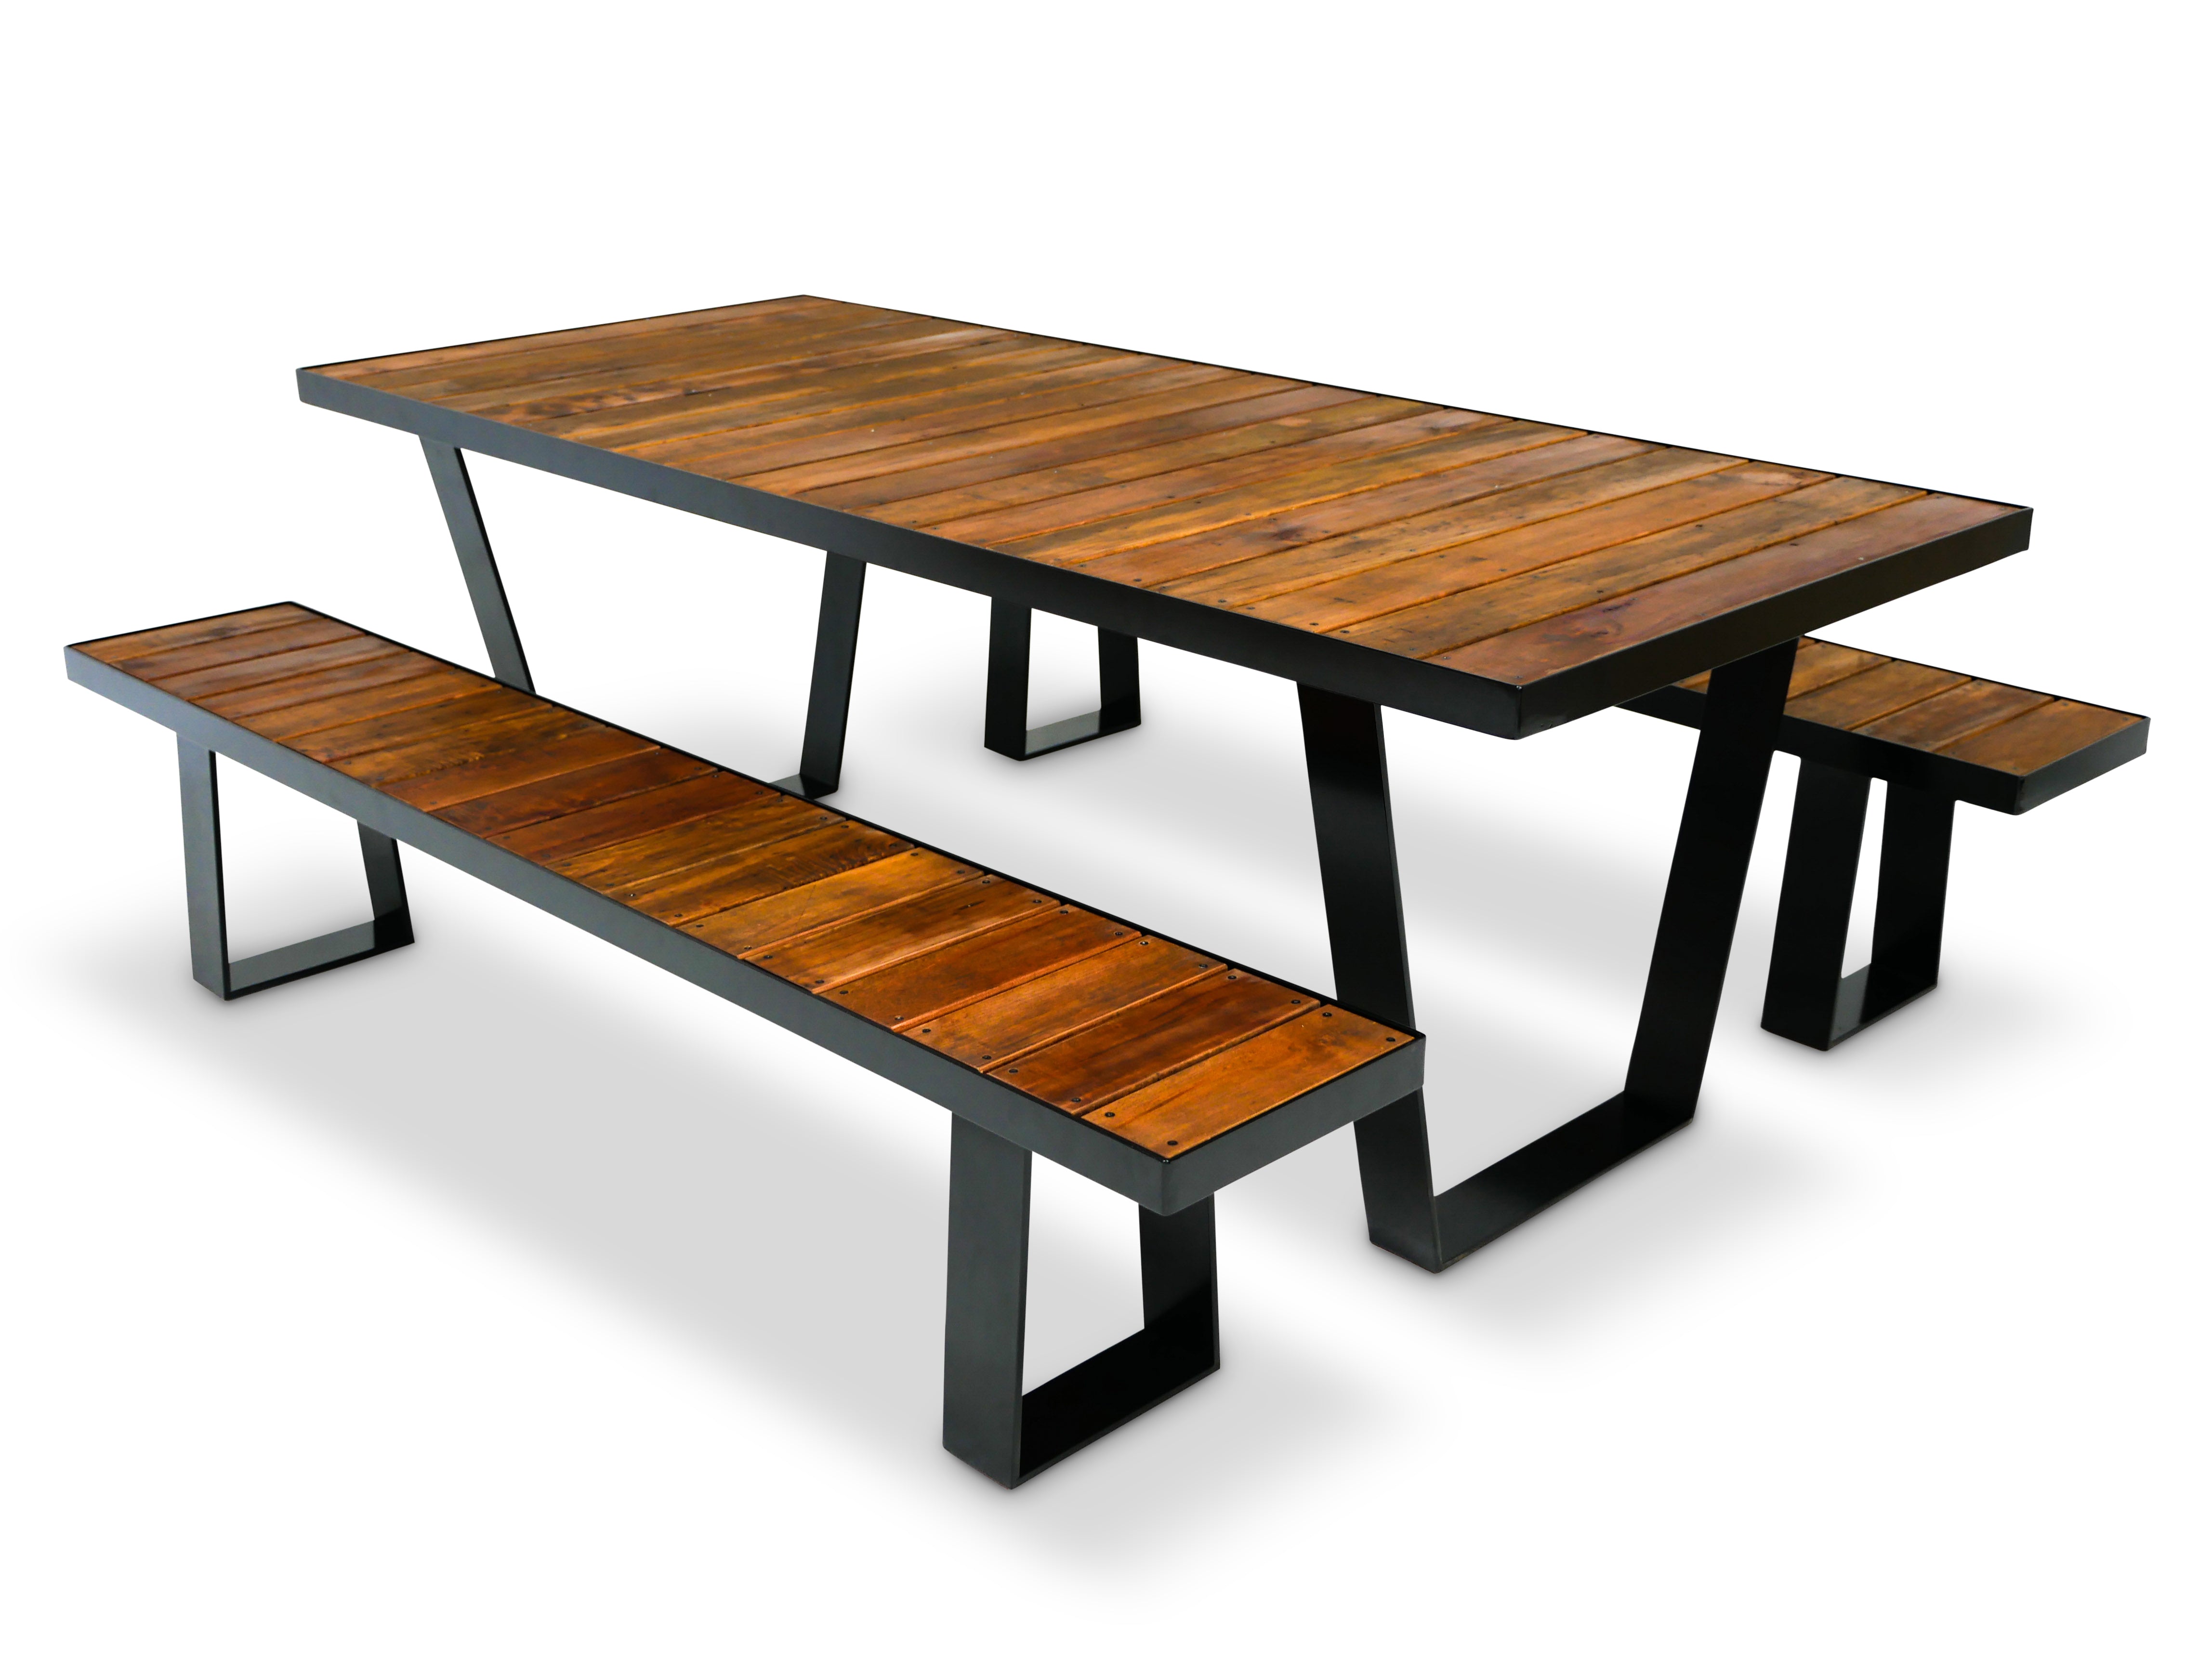 Exterior Dining Table - Angled Frame